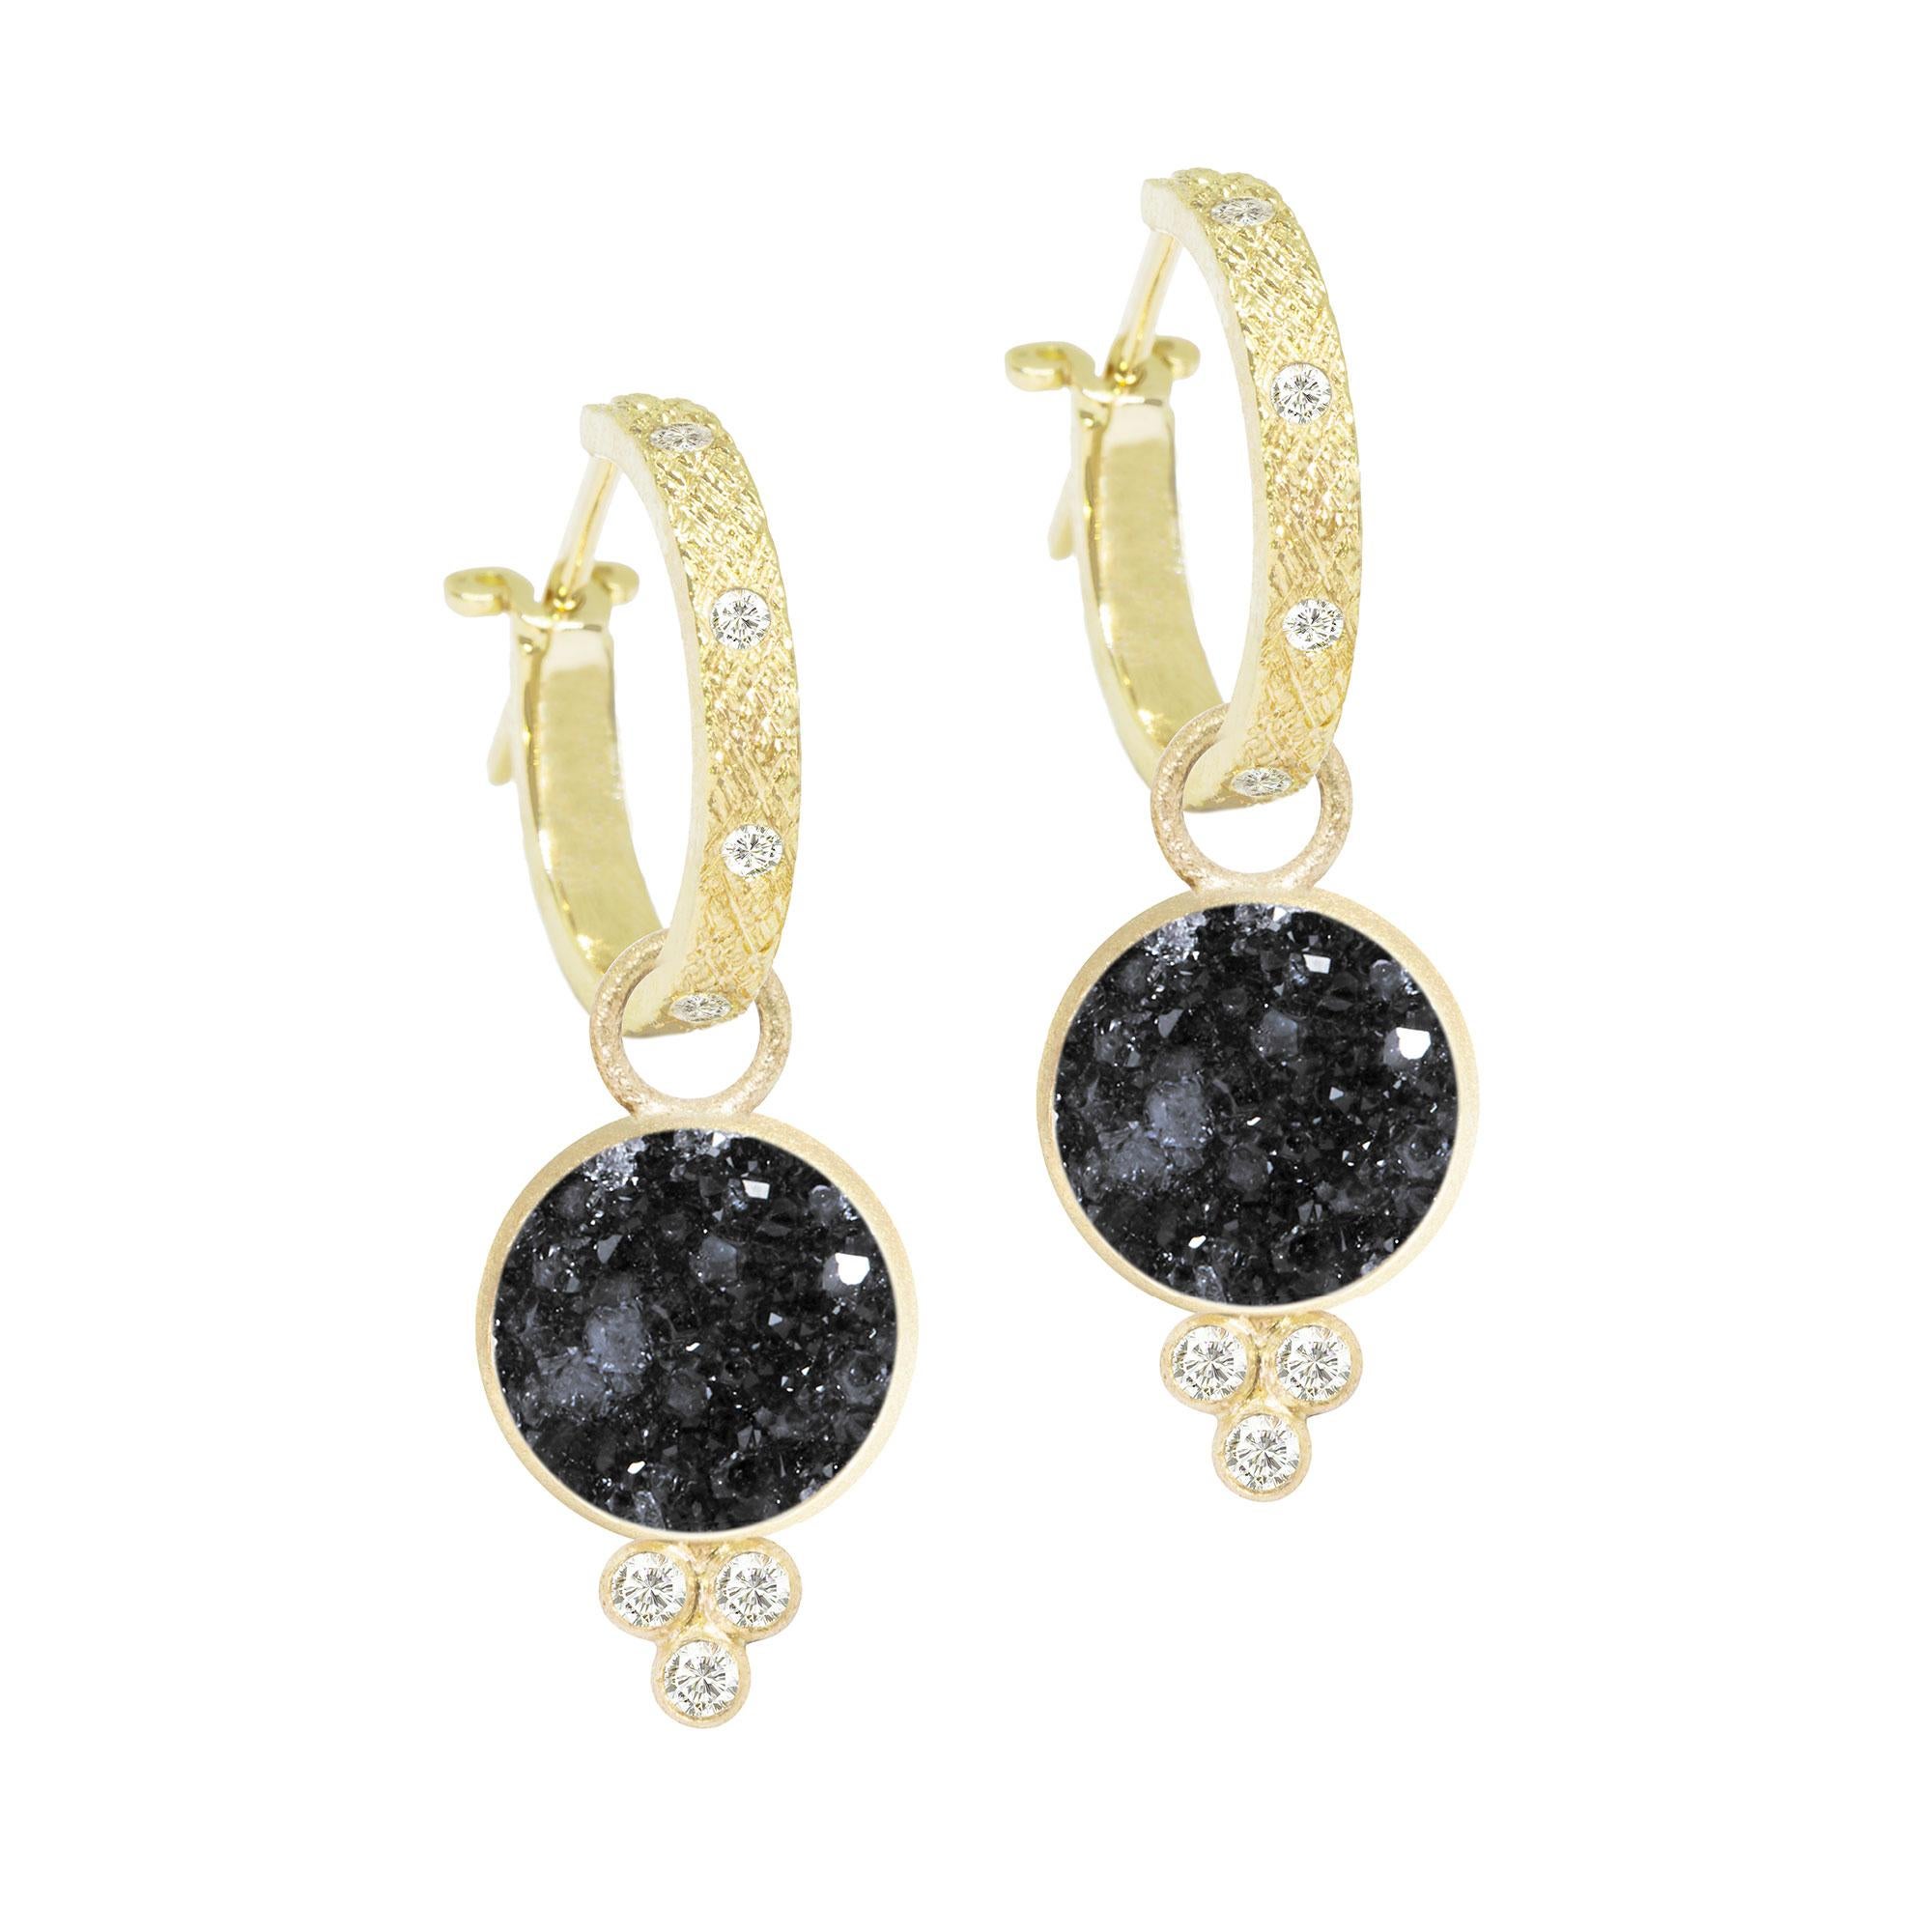 A Nina Nguyen classic to collect and treasure: Our diamond-accented Chloe Gold Charms are designed with black druzy rimmed in gold. They pair with any of our hoops and mix well with other styles.

Nina Nguyen Design's patent-pending earrings have an